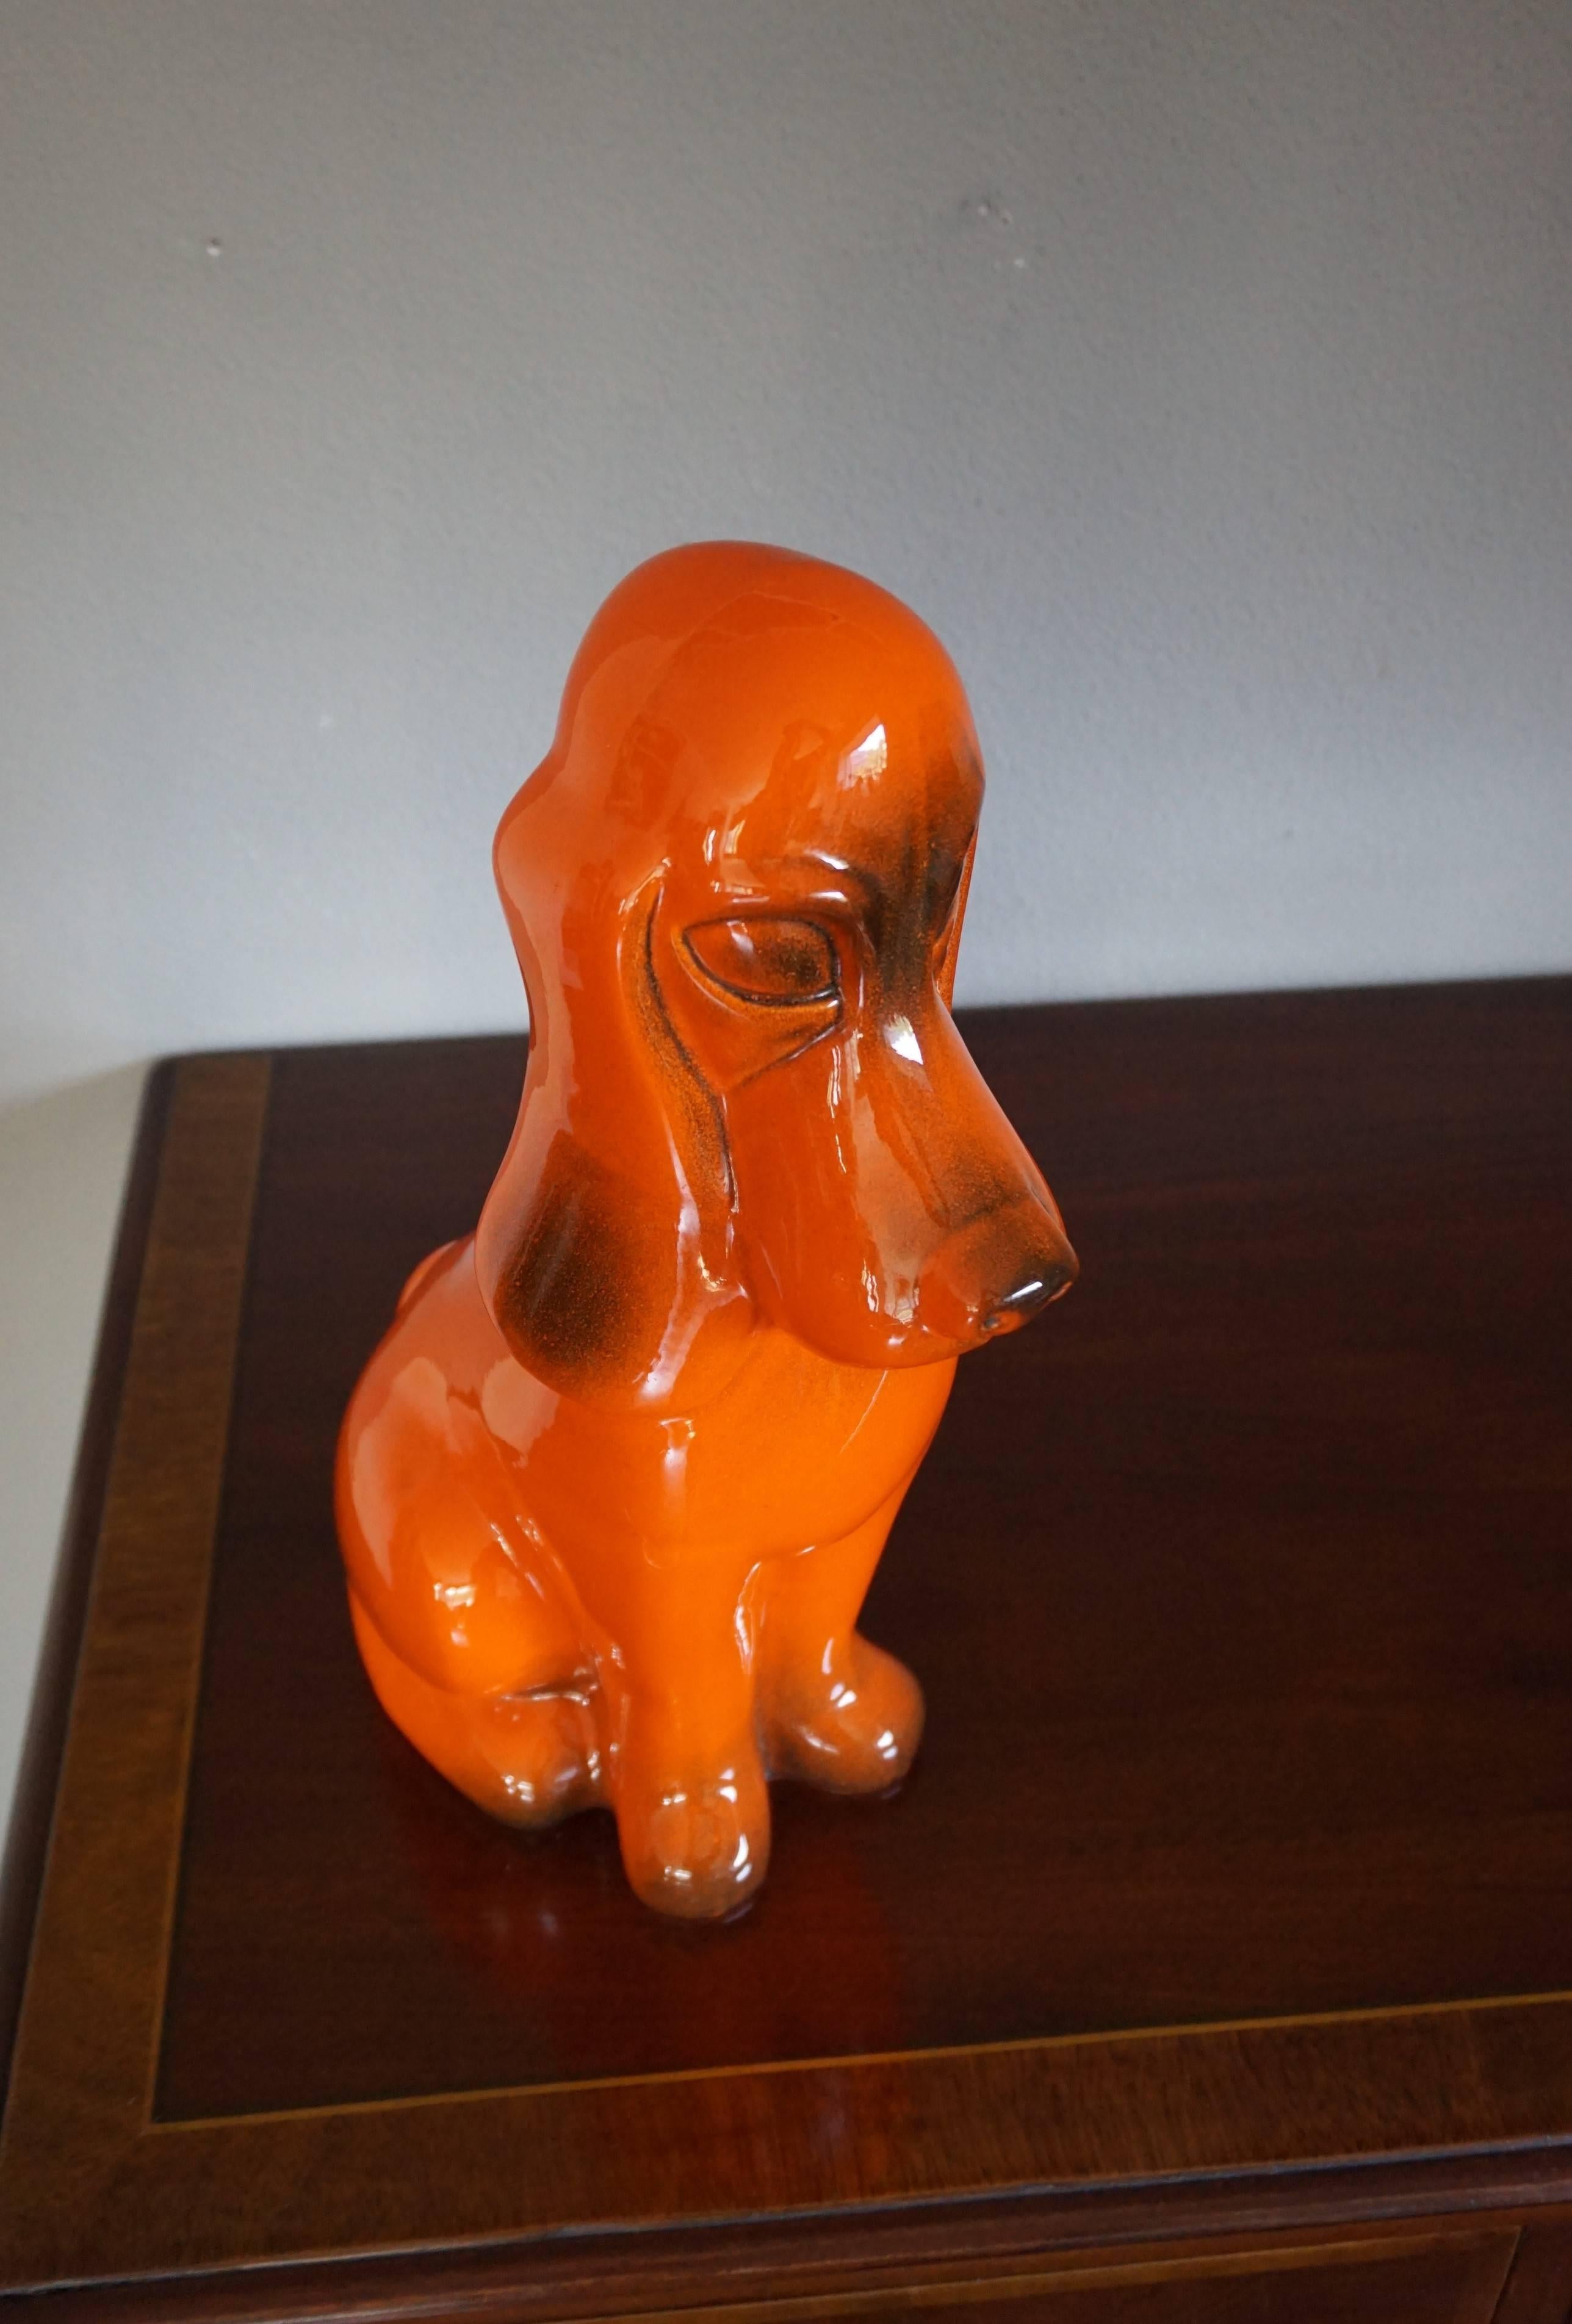 Rare Midcentury Glazed and Marked, Stylized Basset Hound / Droopy Dog Sculpture 1